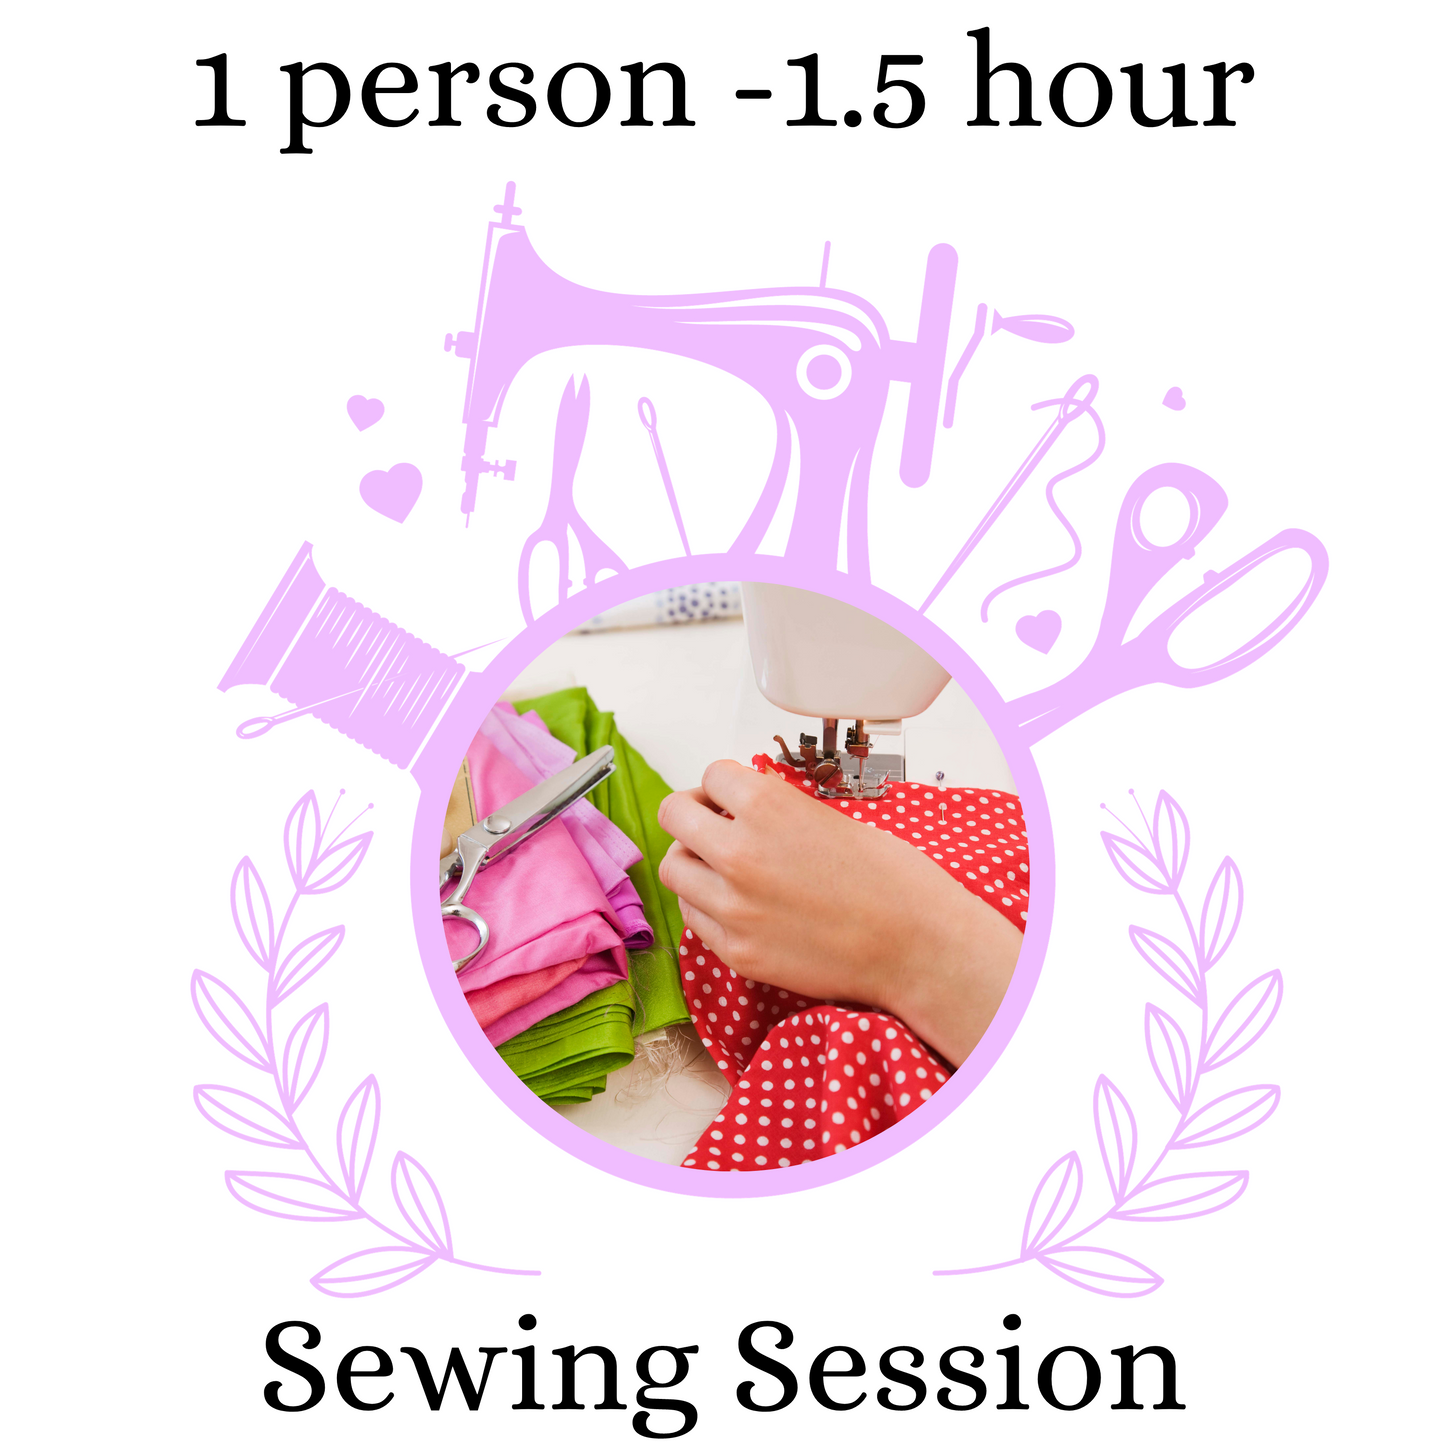 Sewing Class - 1 person for 1.5 hours